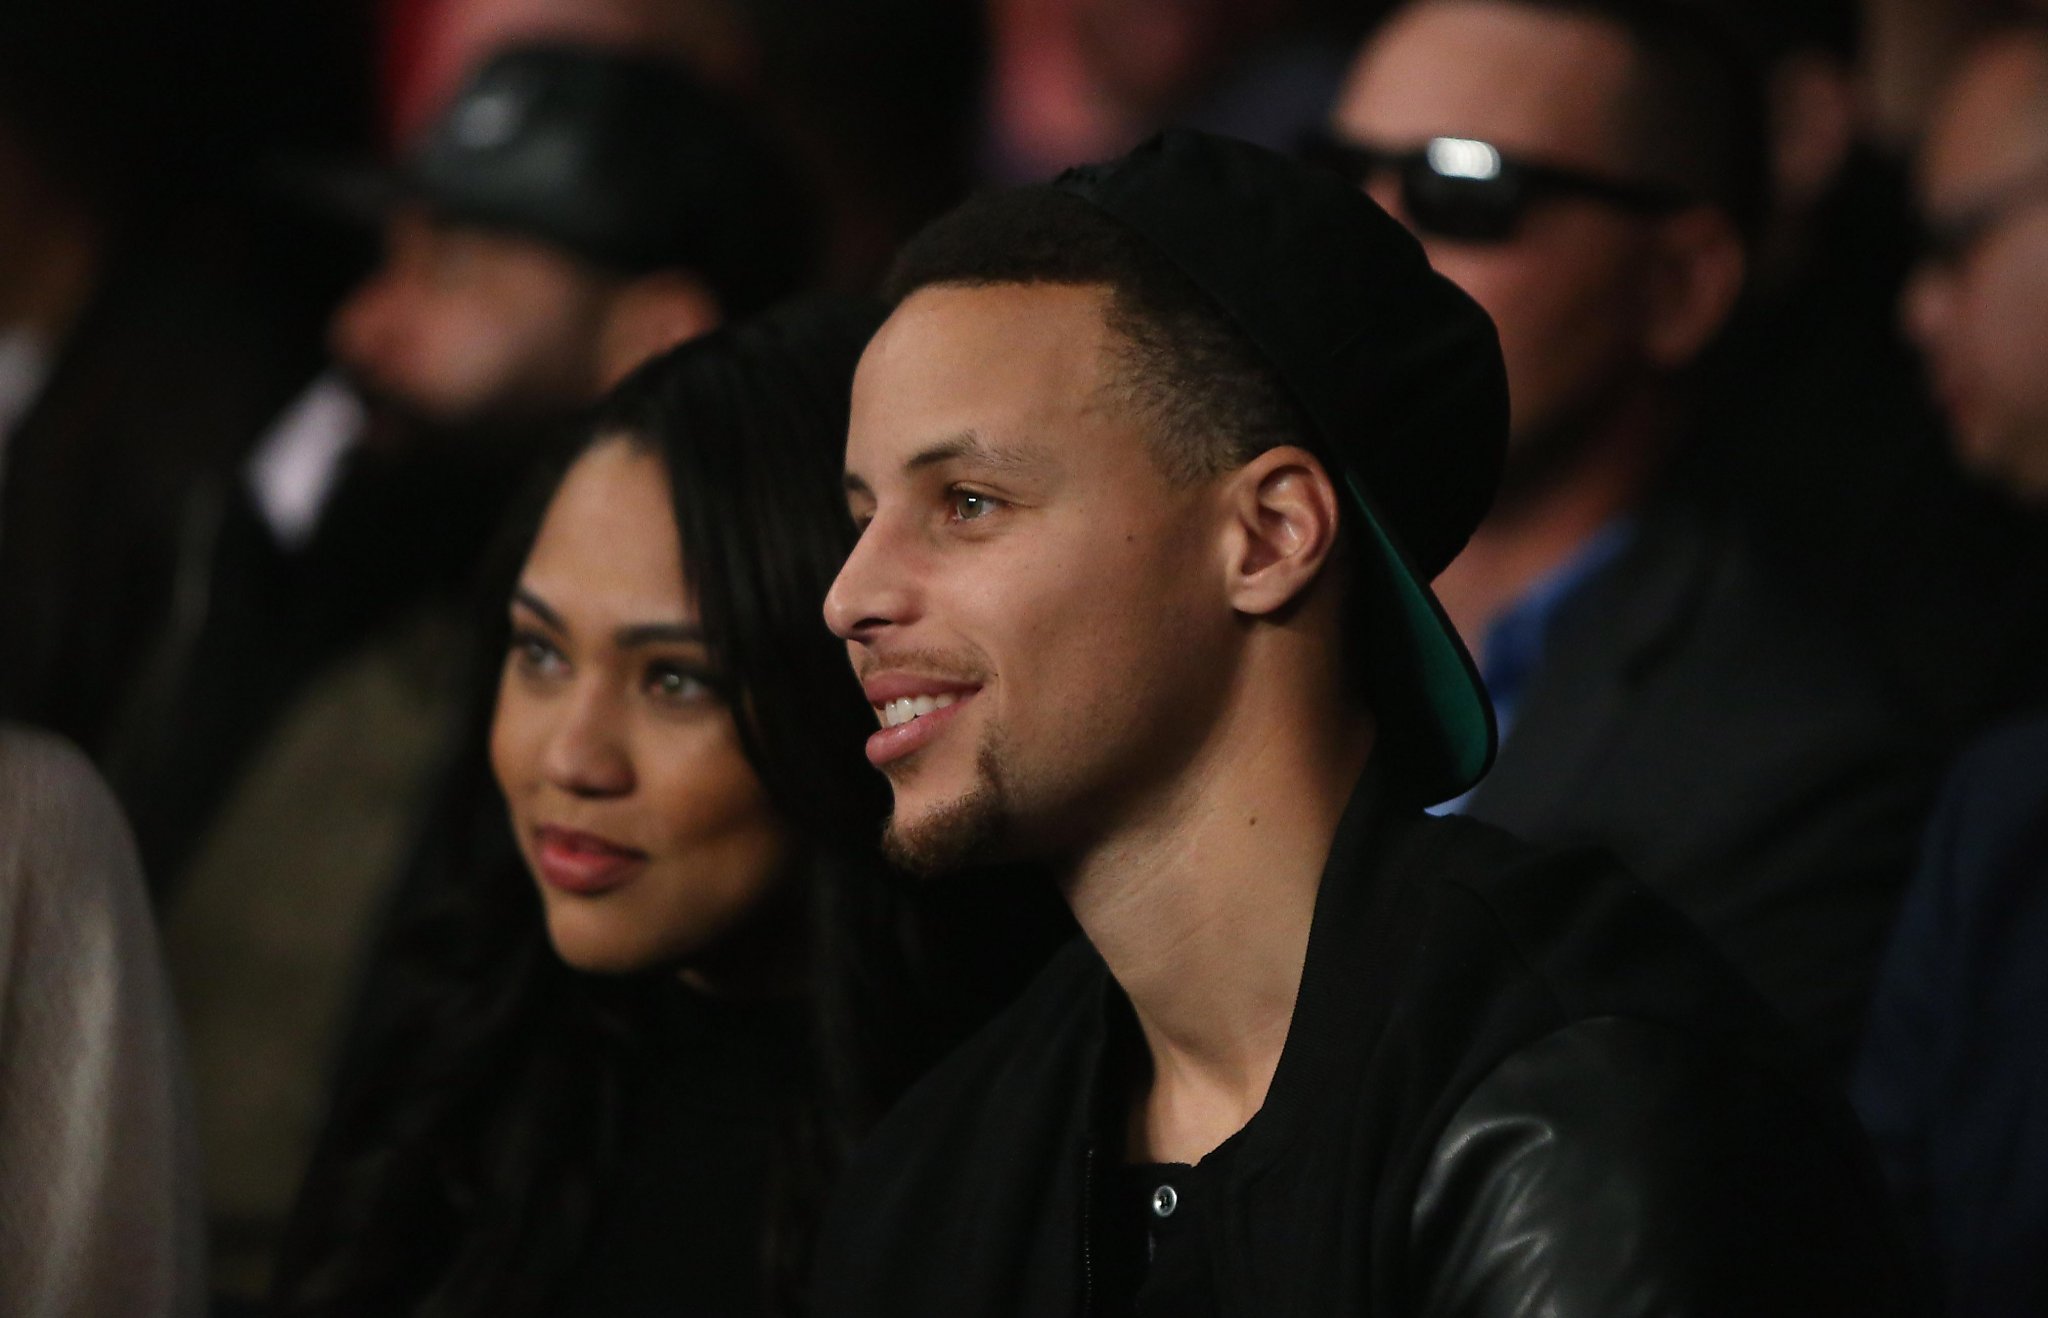 Ayesha Curry says the NBA rigged Game 6 for 'money or ratings